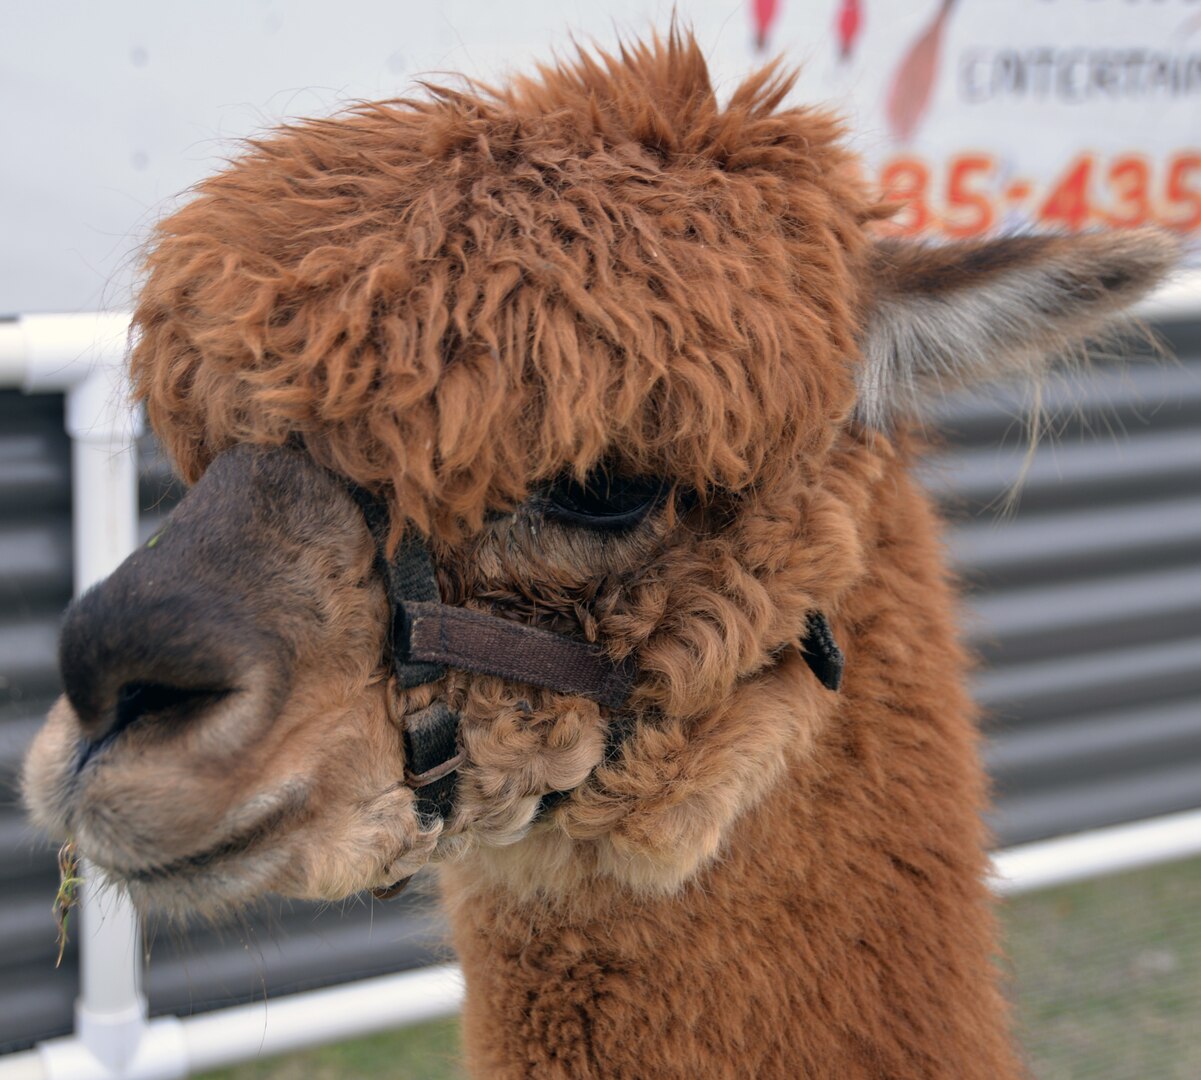 Kids also were fascinated by a petting zoo with everything from tortoises to porcupines to alpacas and even a friendly boa constrictor at the annual Cowboys for Heroes chuckwagon event at Joint Base San Antonio-Fort Sam Houston March 30.